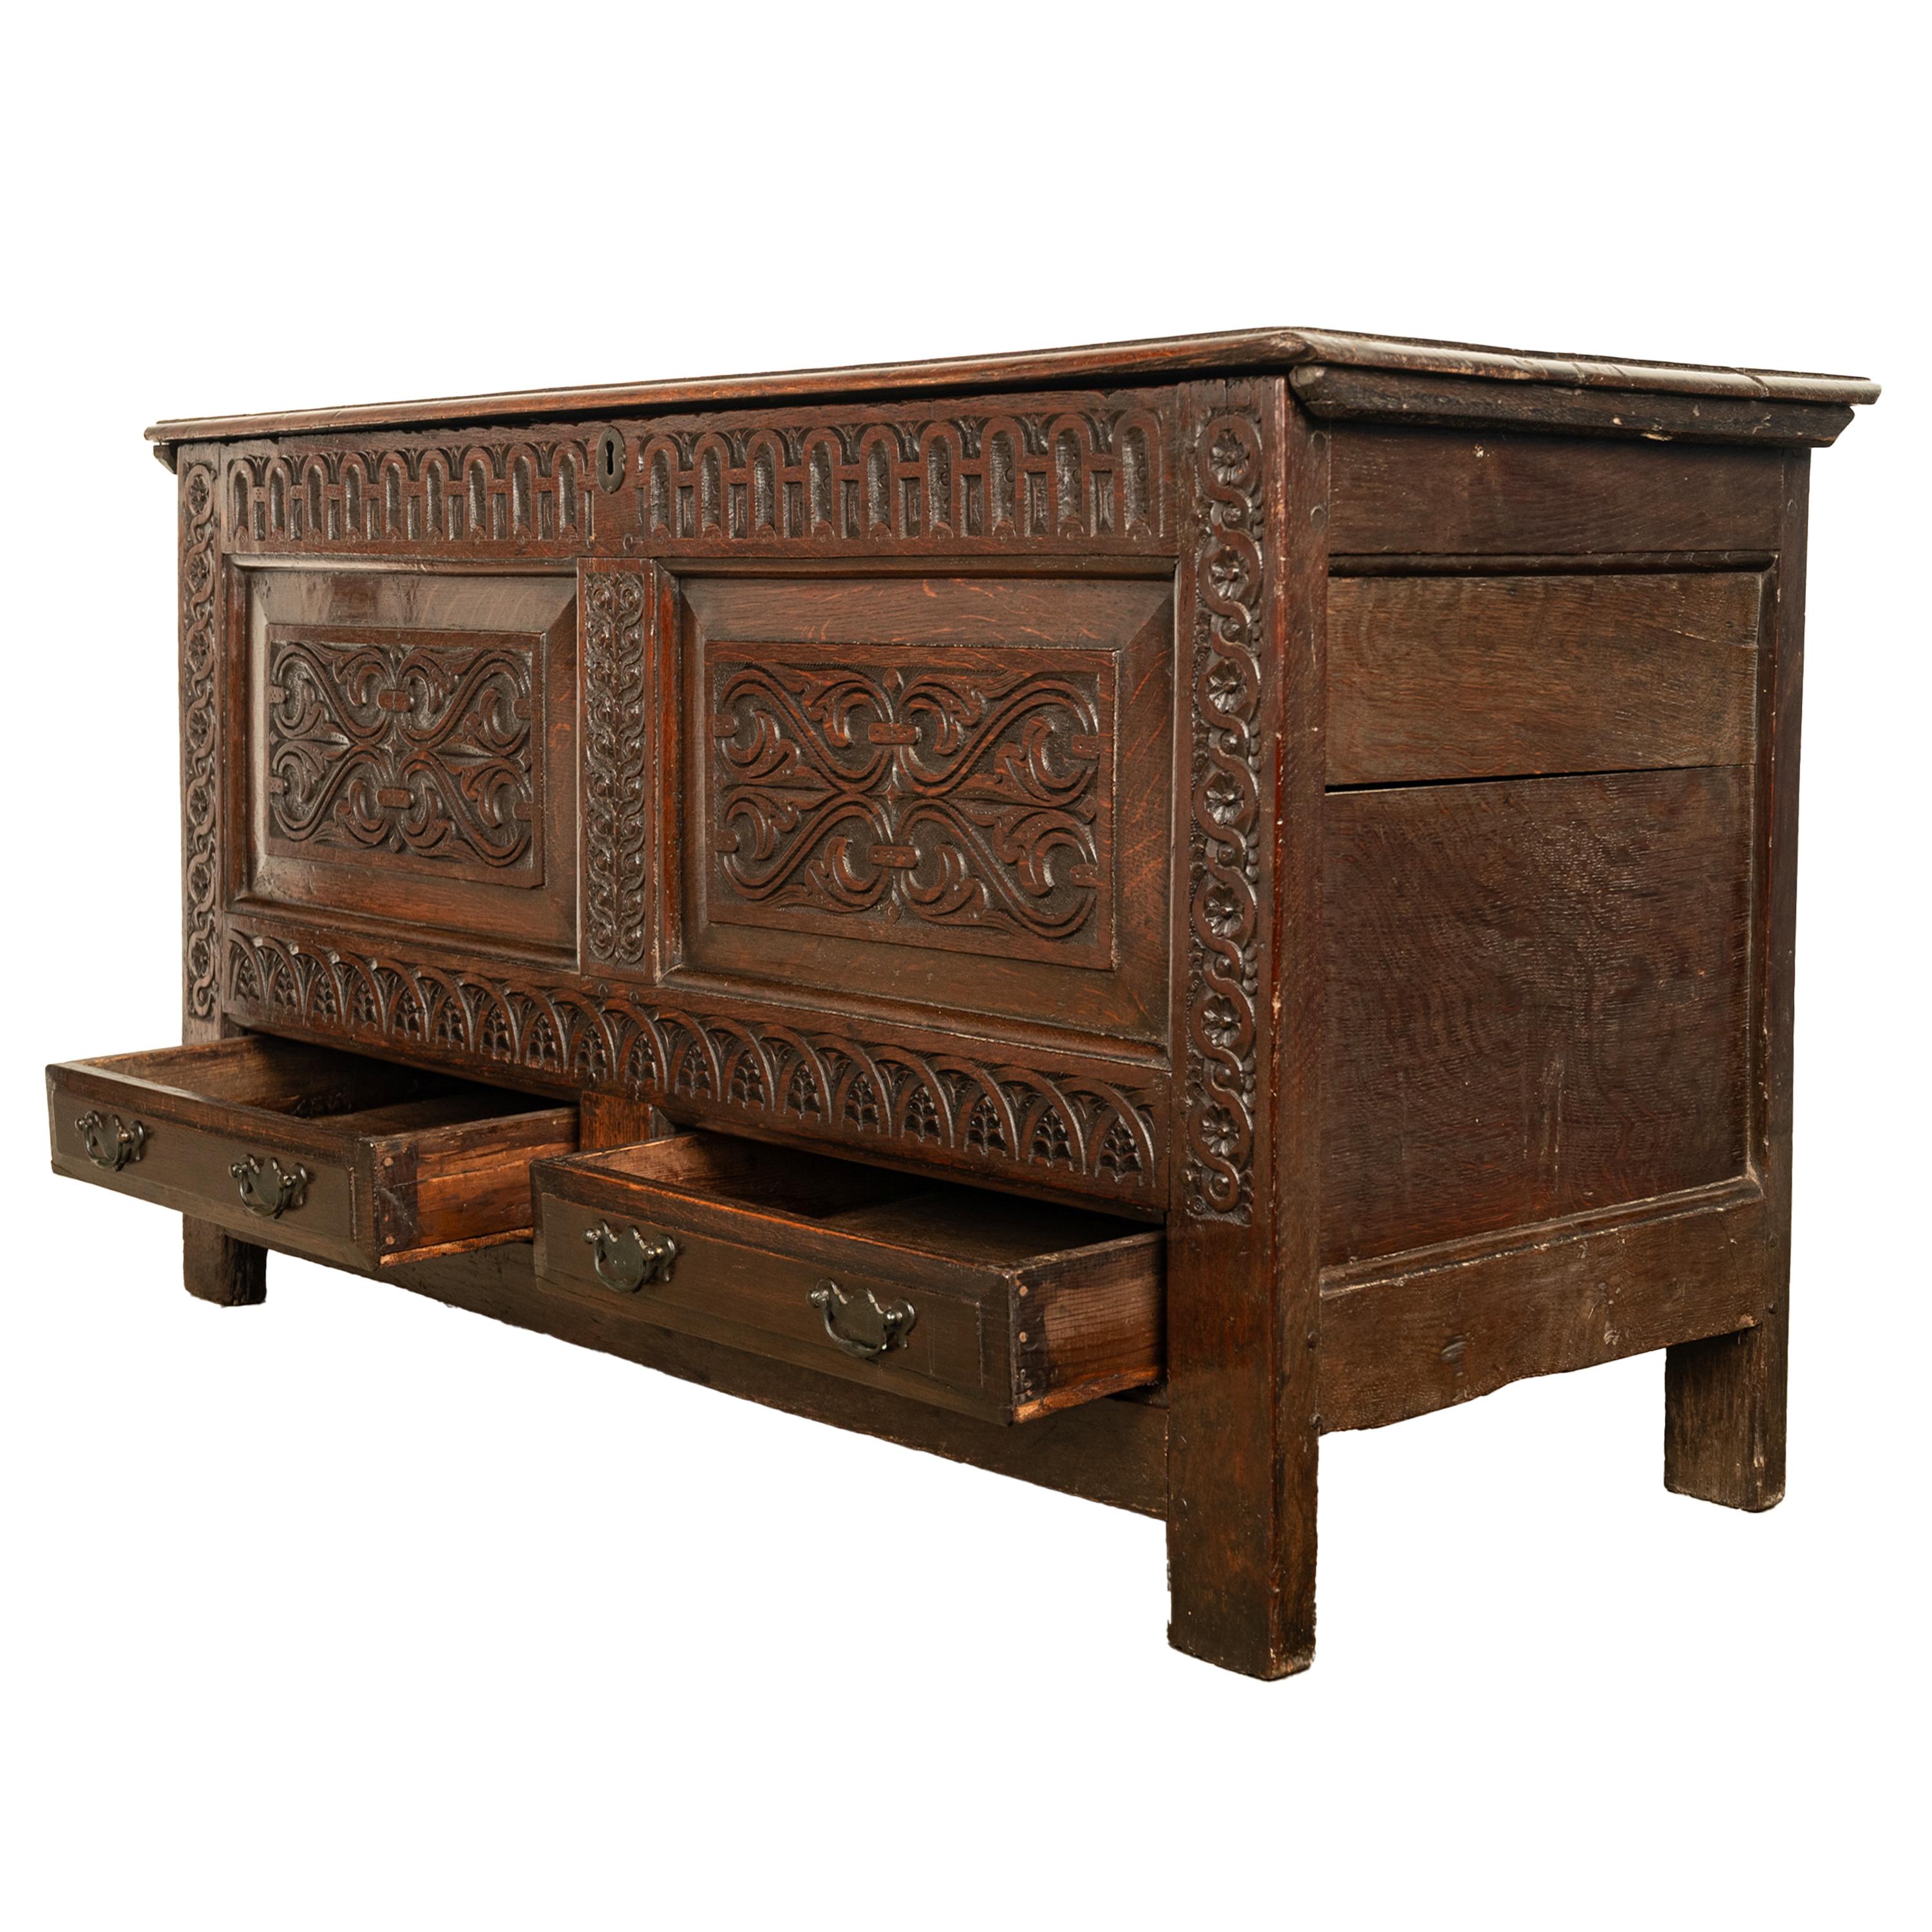  Antique English 17th Century King Charles II Carved Oak Coffer Mule Chest 1680  In Good Condition For Sale In Portland, OR